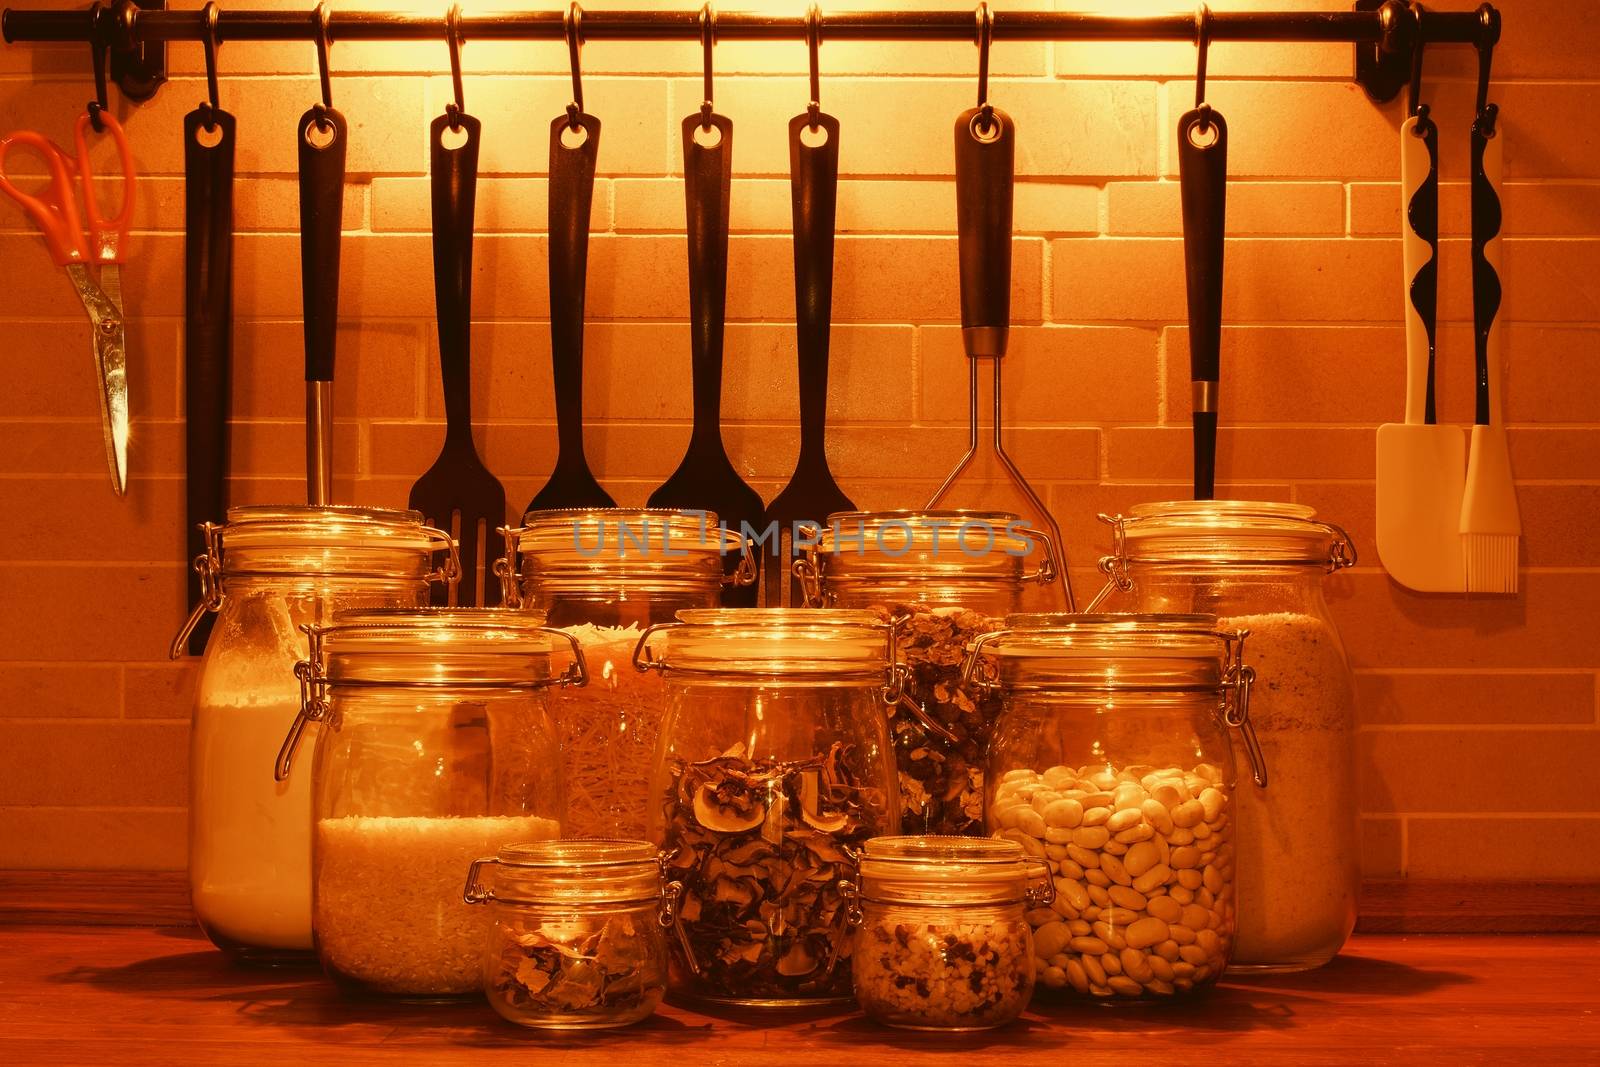 Kitchen jars for kitchen ingredients. Kitchen tools for cooking by roman_nerud